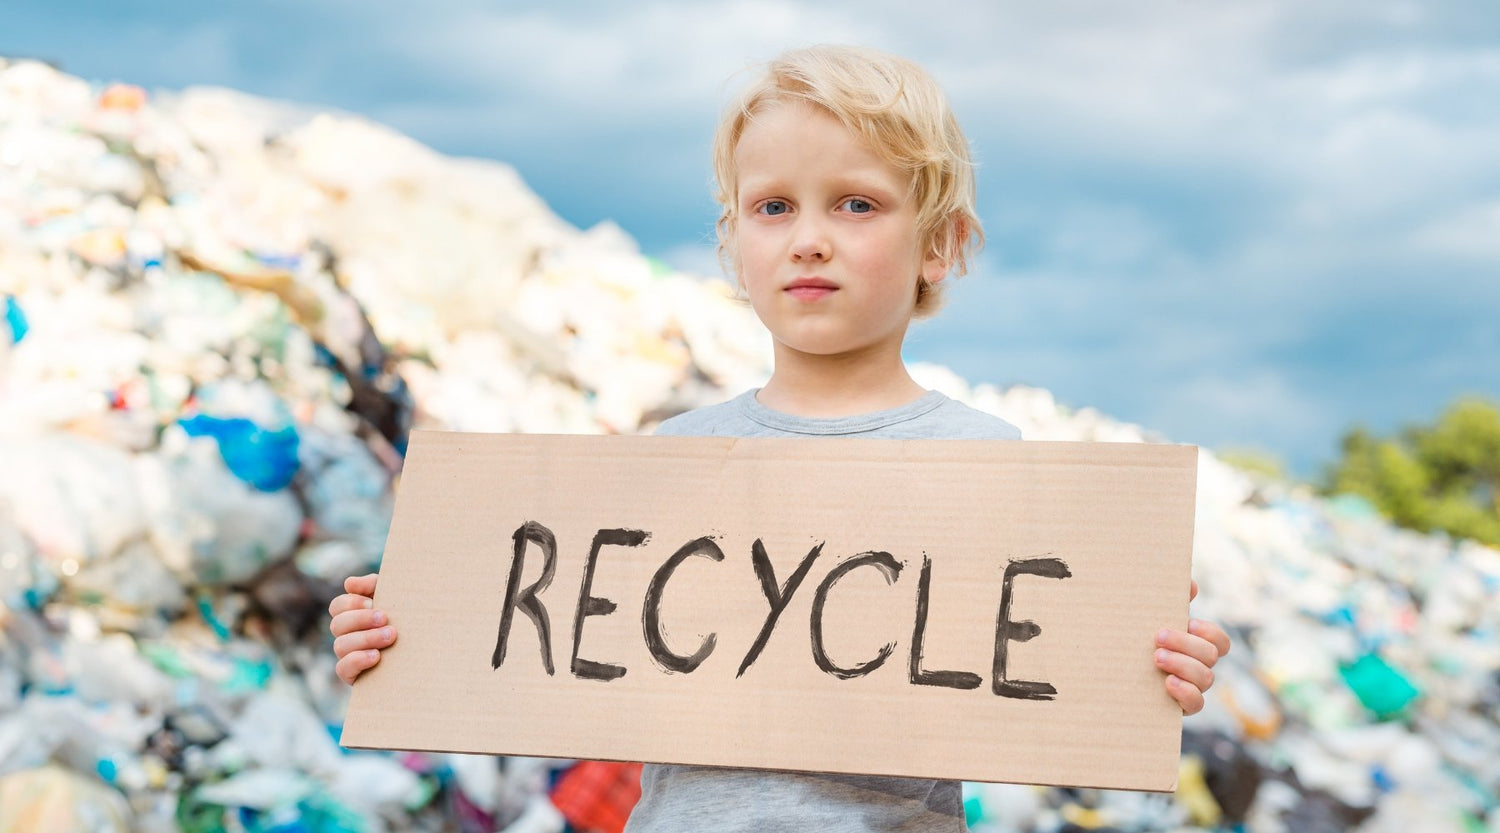 How to recycle more and reduce contamination - truthpaste